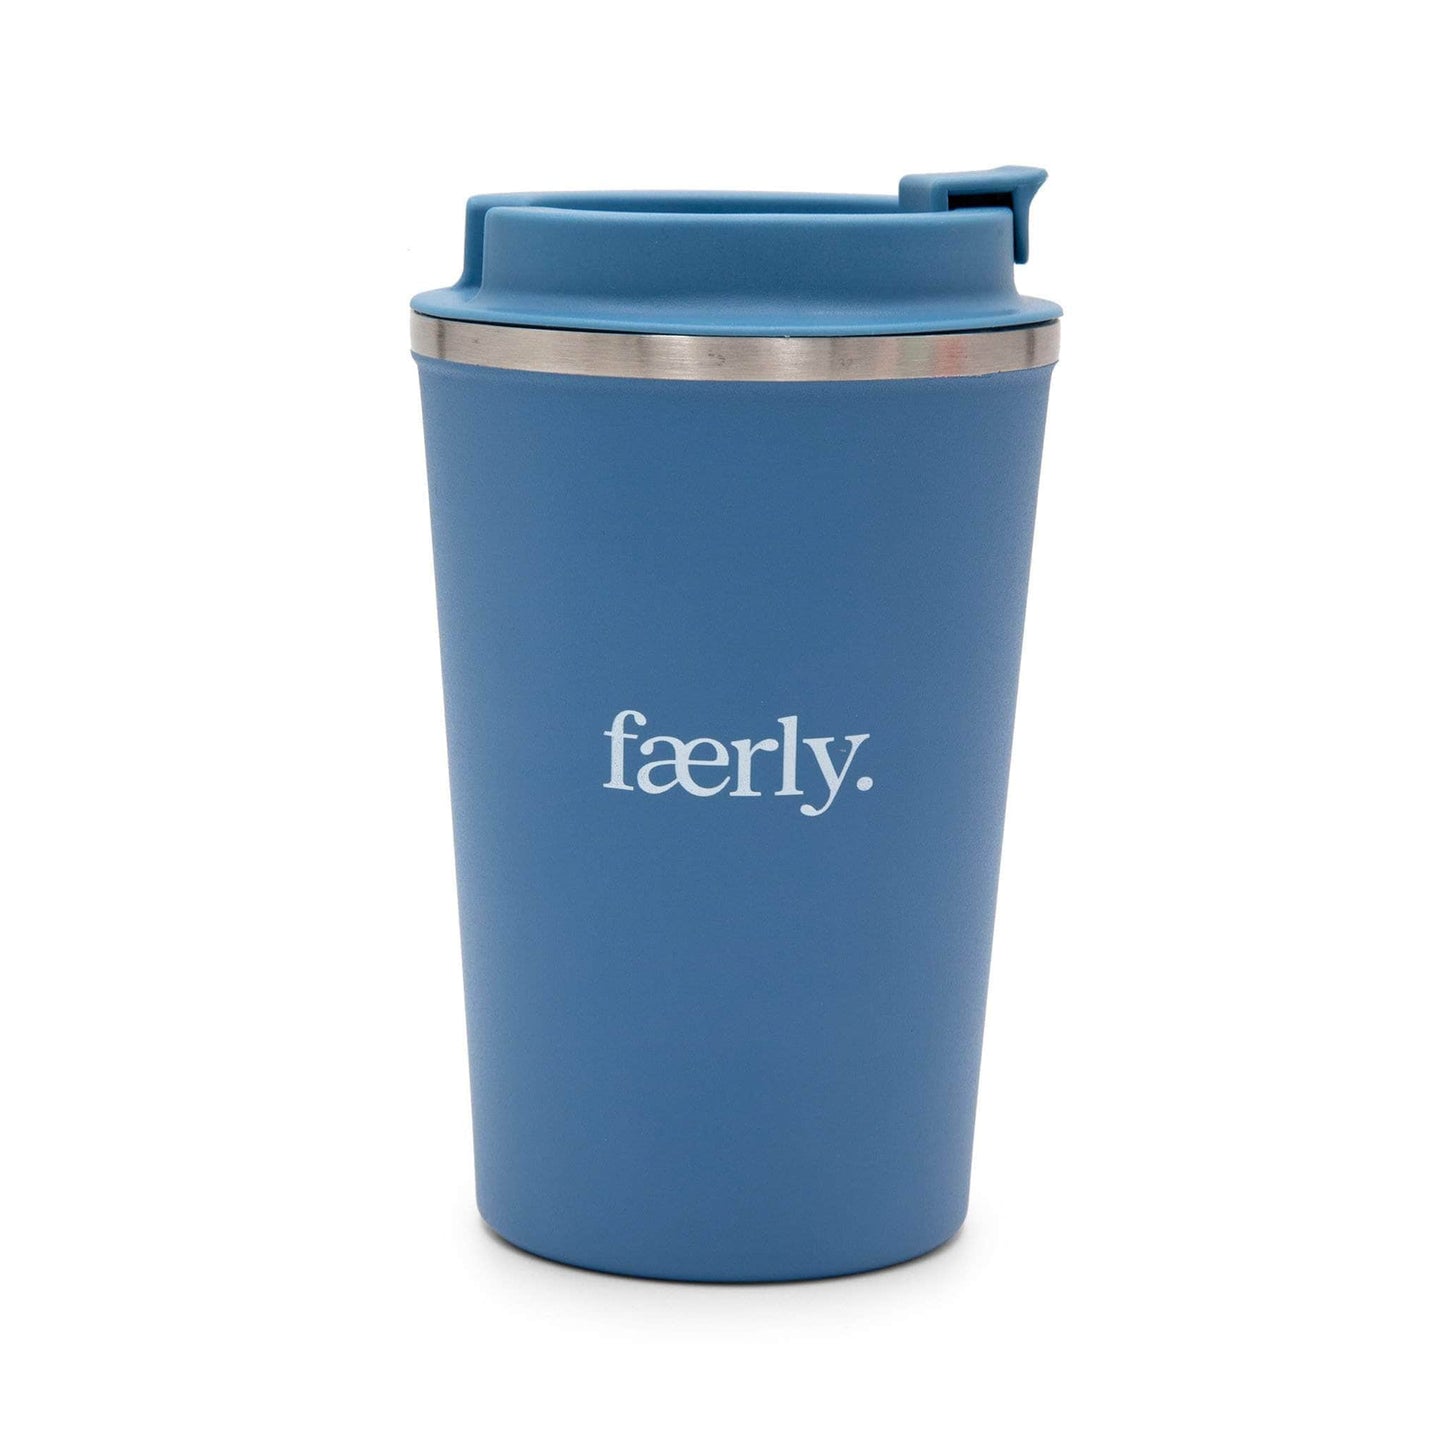 Neon Kactus Coffee Cup Stainless Steel Insulated Coffee Cup - 12oz - Super Sonic Pastel Blue